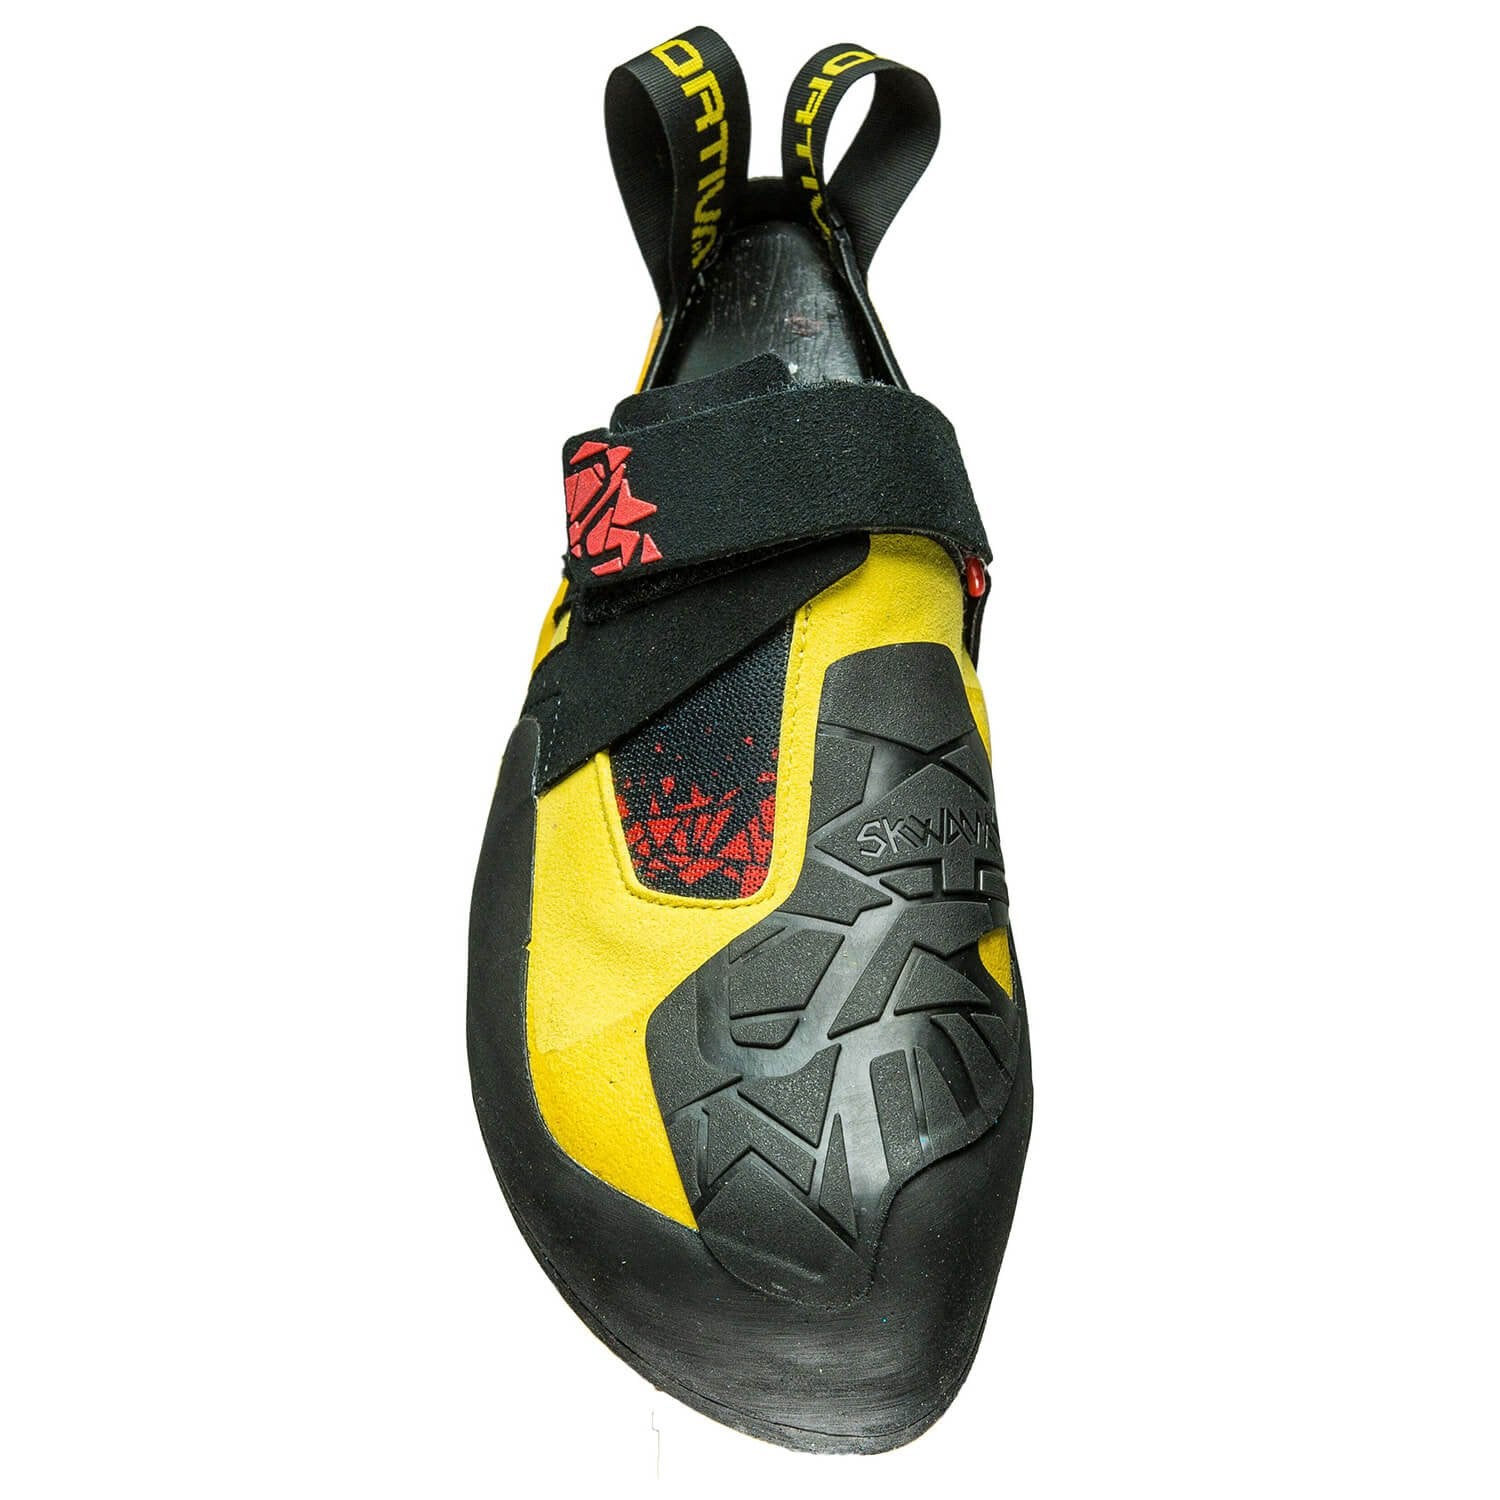 La Sportiva Skwama climbing shoe, in black, yellow and red colours